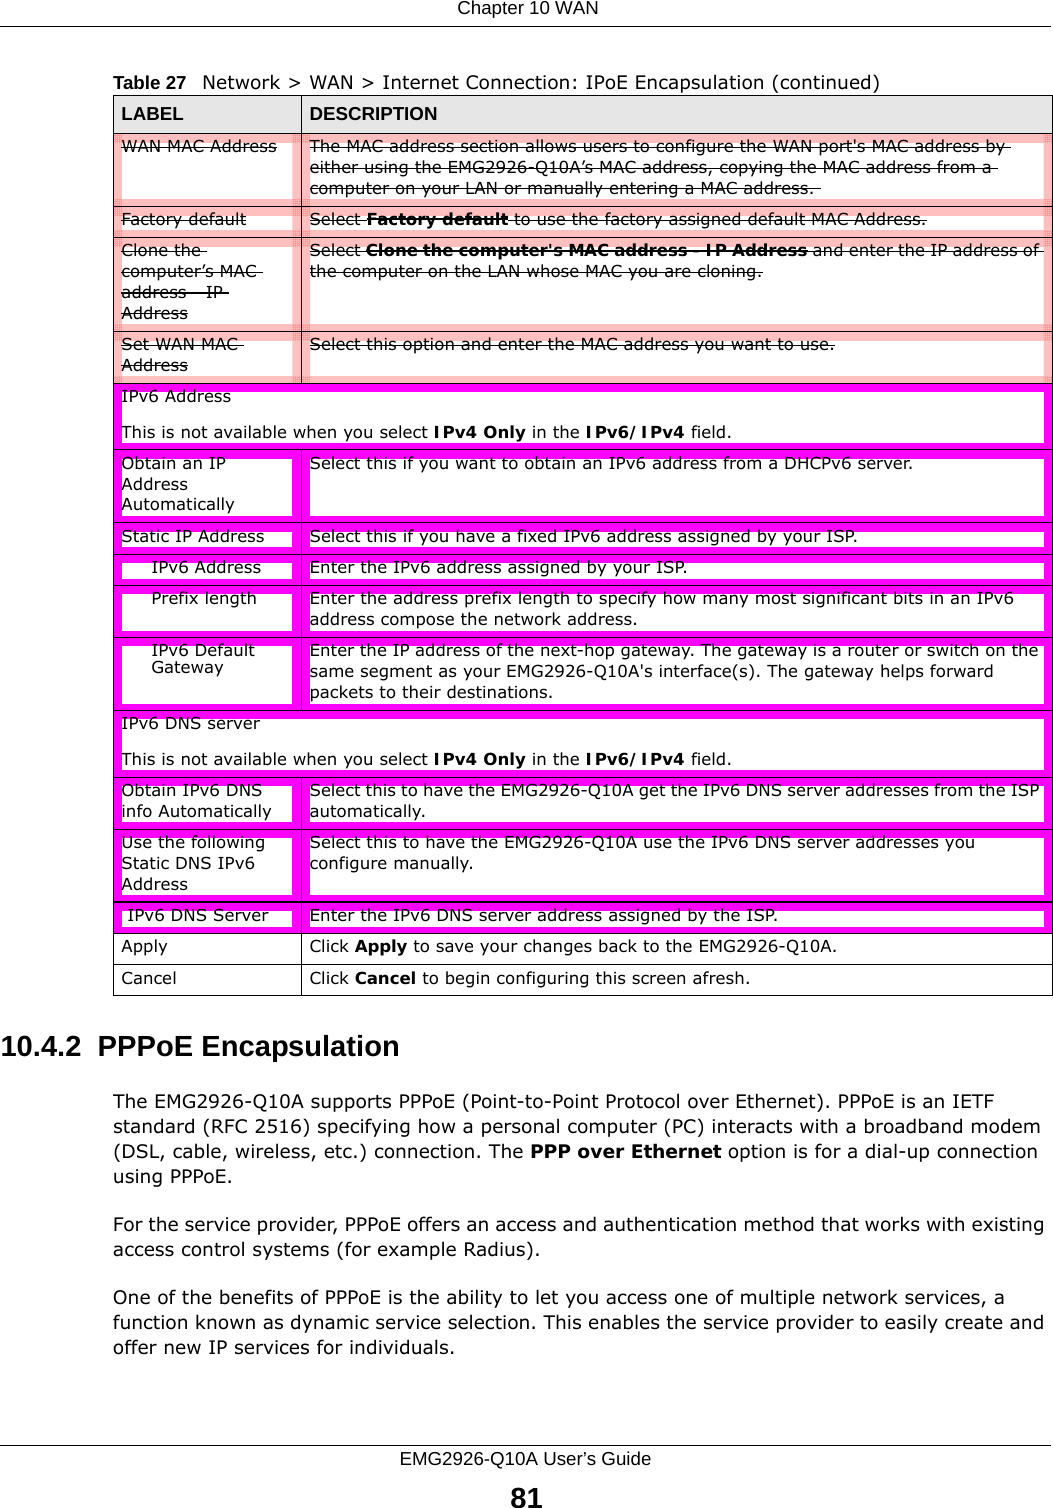  Chapter 10 WANEMG2926-Q10A User’s Guide8110.4.2  PPPoE EncapsulationThe EMG2926-Q10A supports PPPoE (Point-to-Point Protocol over Ethernet). PPPoE is an IETF standard (RFC 2516) specifying how a personal computer (PC) interacts with a broadband modem (DSL, cable, wireless, etc.) connection. The PPP over Ethernet option is for a dial-up connection using PPPoE.For the service provider, PPPoE offers an access and authentication method that works with existing access control systems (for example Radius).One of the benefits of PPPoE is the ability to let you access one of multiple network services, a function known as dynamic service selection. This enables the service provider to easily create and offer new IP services for individuals.WAN MAC Address The MAC address section allows users to configure the WAN port&apos;s MAC address by either using the EMG2926-Q10A’s MAC address, copying the MAC address from a computer on your LAN or manually entering a MAC address. Factory default Select Factory default to use the factory assigned default MAC Address.Clone the computer’s MAC address - IP AddressSelect Clone the computer&apos;s MAC address - IP Address and enter the IP address of the computer on the LAN whose MAC you are cloning.Set WAN MAC AddressSelect this option and enter the MAC address you want to use.IPv6 AddressThis is not available when you select IPv4 Only in the IPv6/IPv4 field.Obtain an IP Address AutomaticallySelect this if you want to obtain an IPv6 address from a DHCPv6 server. Static IP Address Select this if you have a fixed IPv6 address assigned by your ISP.IPv6 Address Enter the IPv6 address assigned by your ISP.Prefix length Enter the address prefix length to specify how many most significant bits in an IPv6 address compose the network address.IPv6 Default Gateway Enter the IP address of the next-hop gateway. The gateway is a router or switch on the same segment as your EMG2926-Q10A&apos;s interface(s). The gateway helps forward packets to their destinations.IPv6 DNS serverThis is not available when you select IPv4 Only in the IPv6/IPv4 field.Obtain IPv6 DNS info AutomaticallySelect this to have the EMG2926-Q10A get the IPv6 DNS server addresses from the ISP automatically.Use the following Static DNS IPv6 AddressSelect this to have the EMG2926-Q10A use the IPv6 DNS server addresses you configure manually. IPv6 DNS Server Enter the IPv6 DNS server address assigned by the ISP.Apply Click Apply to save your changes back to the EMG2926-Q10A.Cancel Click Cancel to begin configuring this screen afresh.Table 27   Network &gt; WAN &gt; Internet Connection: IPoE Encapsulation (continued)LABEL DESCRIPTION